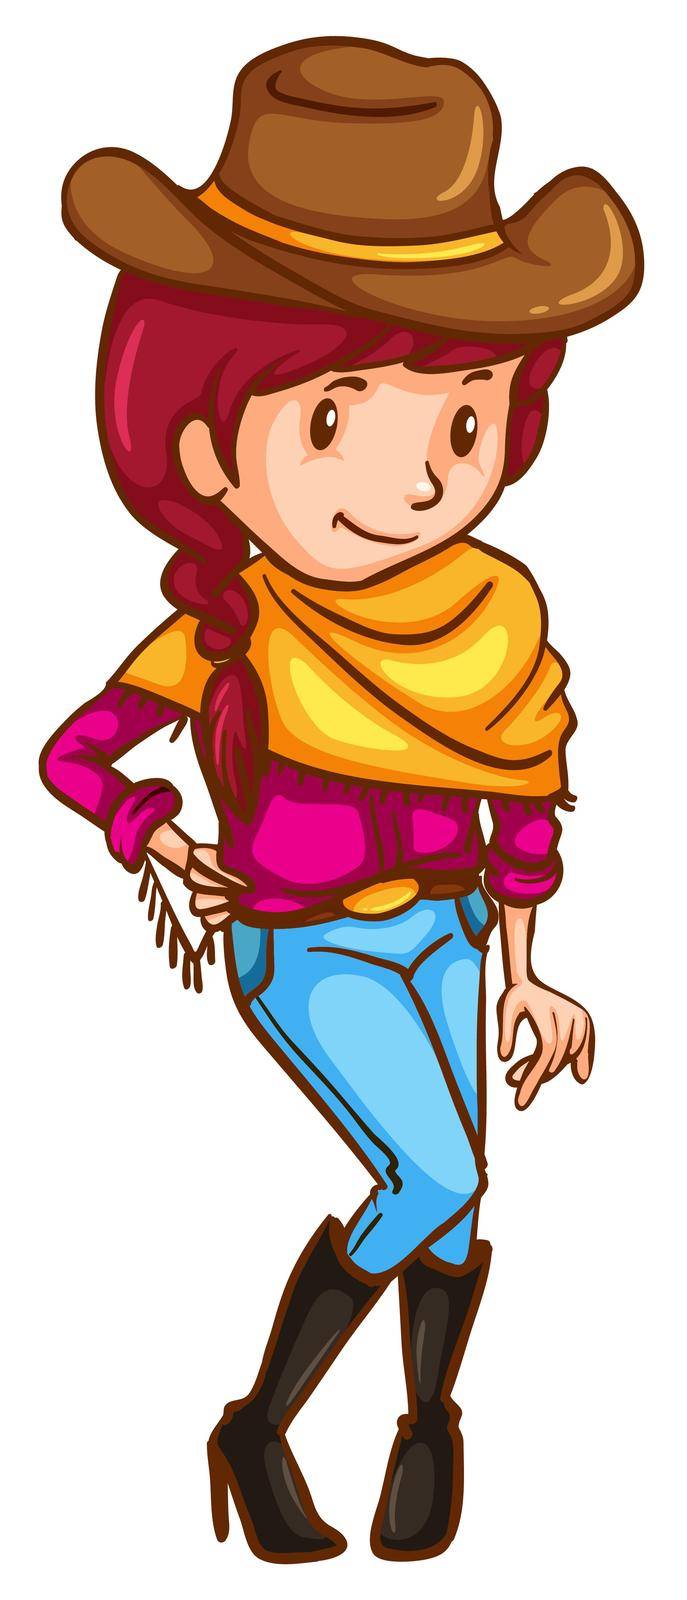 Illustration of a simple coloured sketch of a cowgirl on a white background